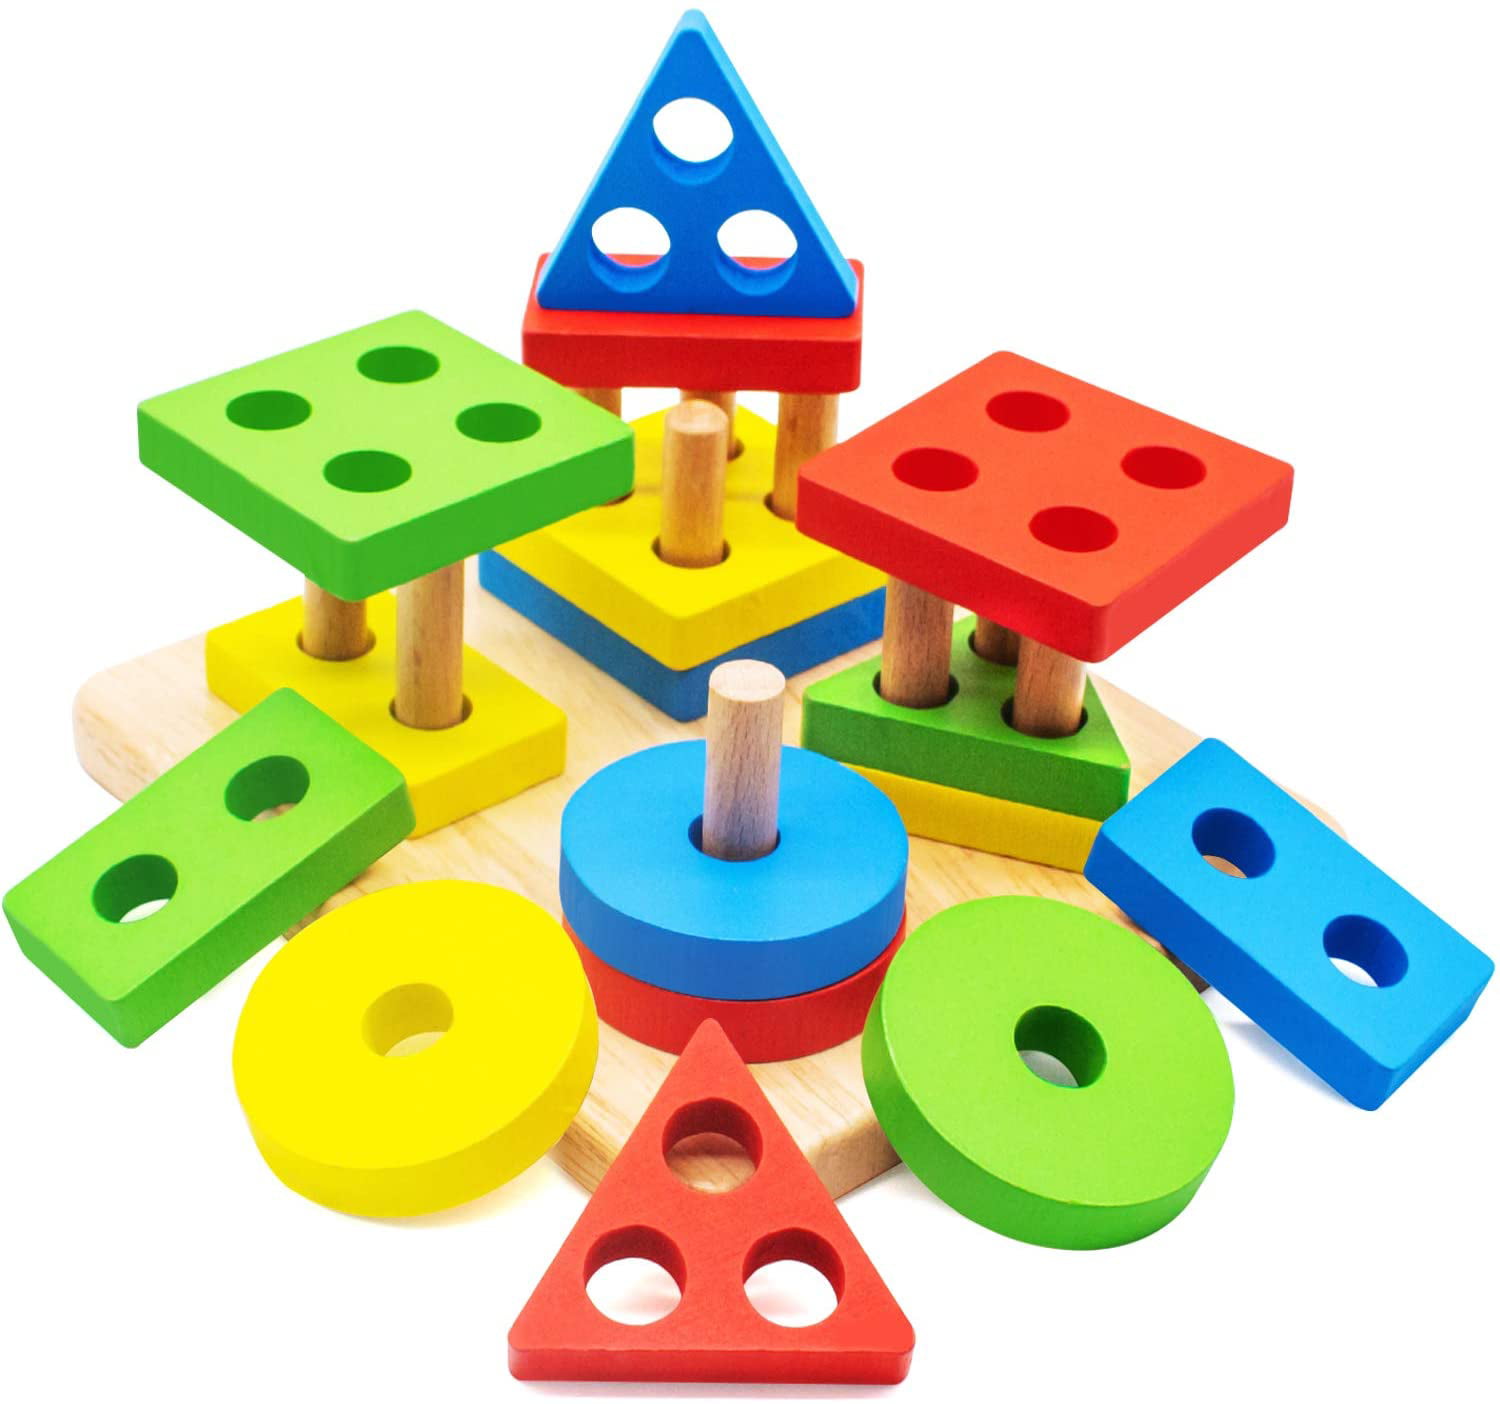 Wooden Puzzle Toddler Toys Shapes Sorter Preschool Blocks Stacking Games 01 